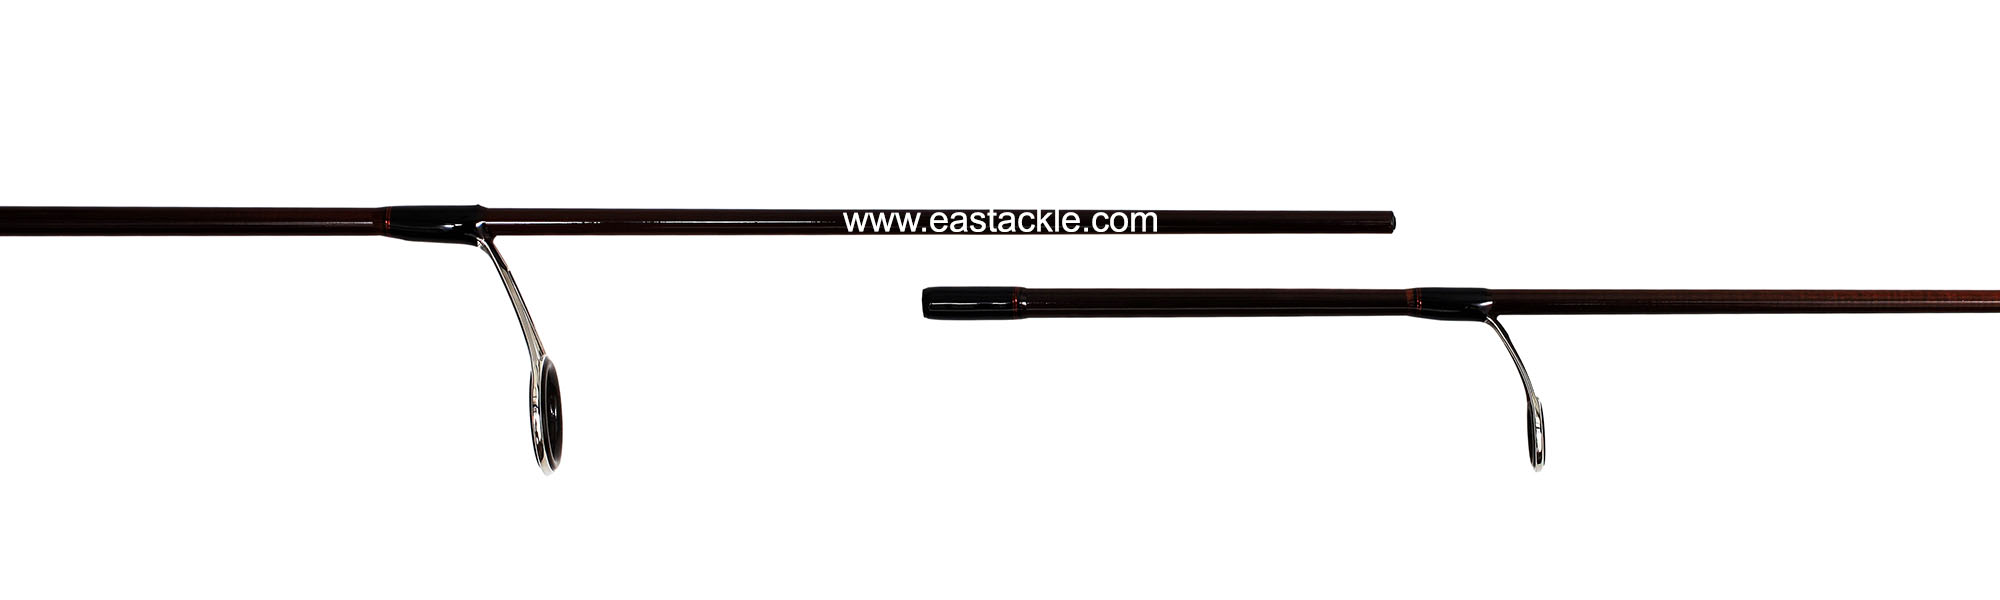 Storm - Discovery - DVS602ML - Spinning Rod - Joint Section (Side View) | Eastackle